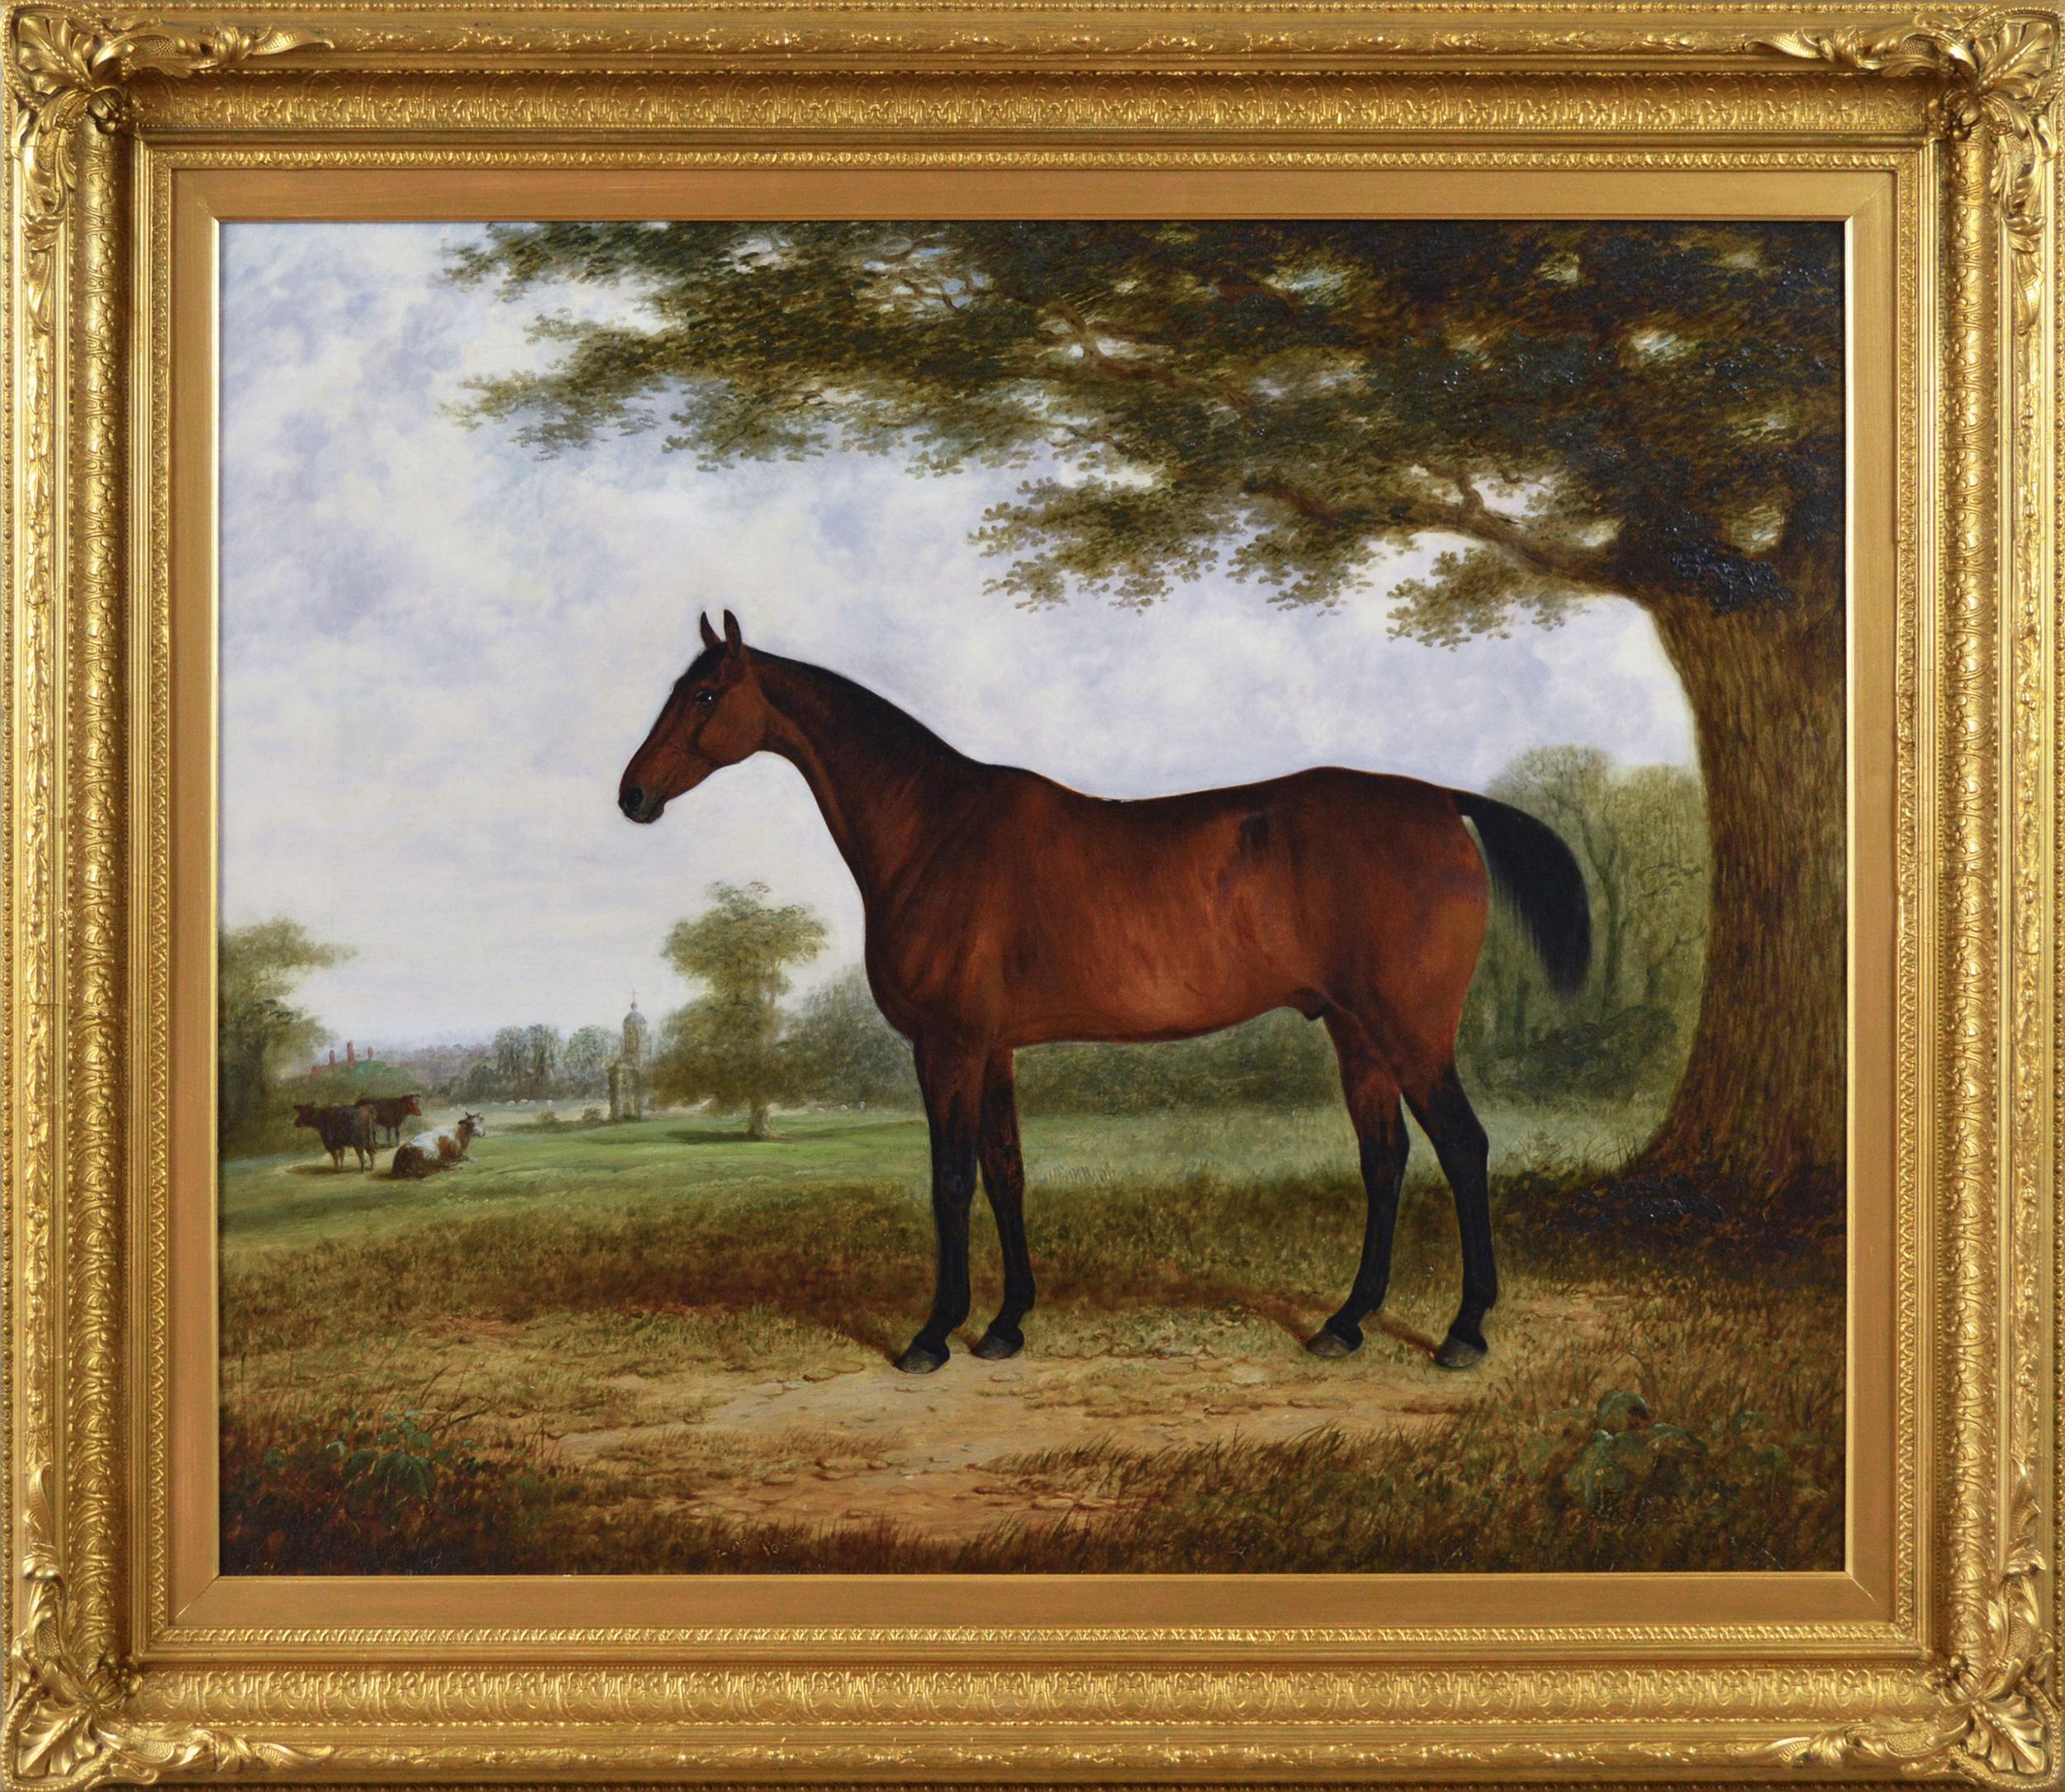 19th Century sporting animal oil painting of a horse with cattle in a landscape 